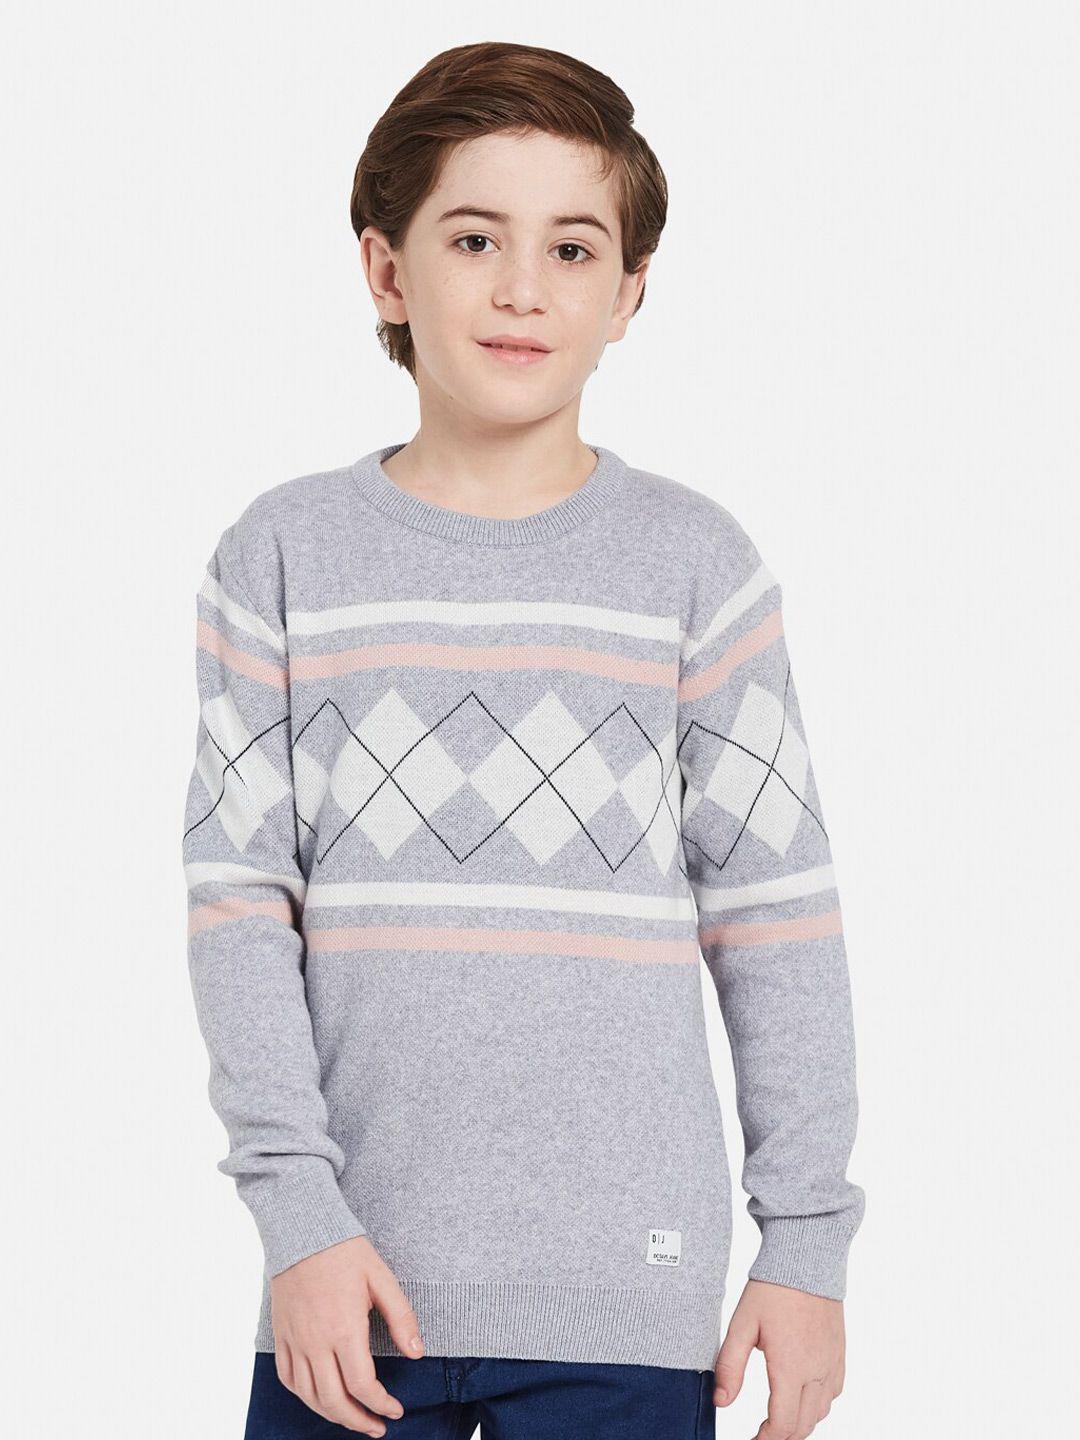 octave boys geometric printed round neck long sleeve pullover cotton sweaters